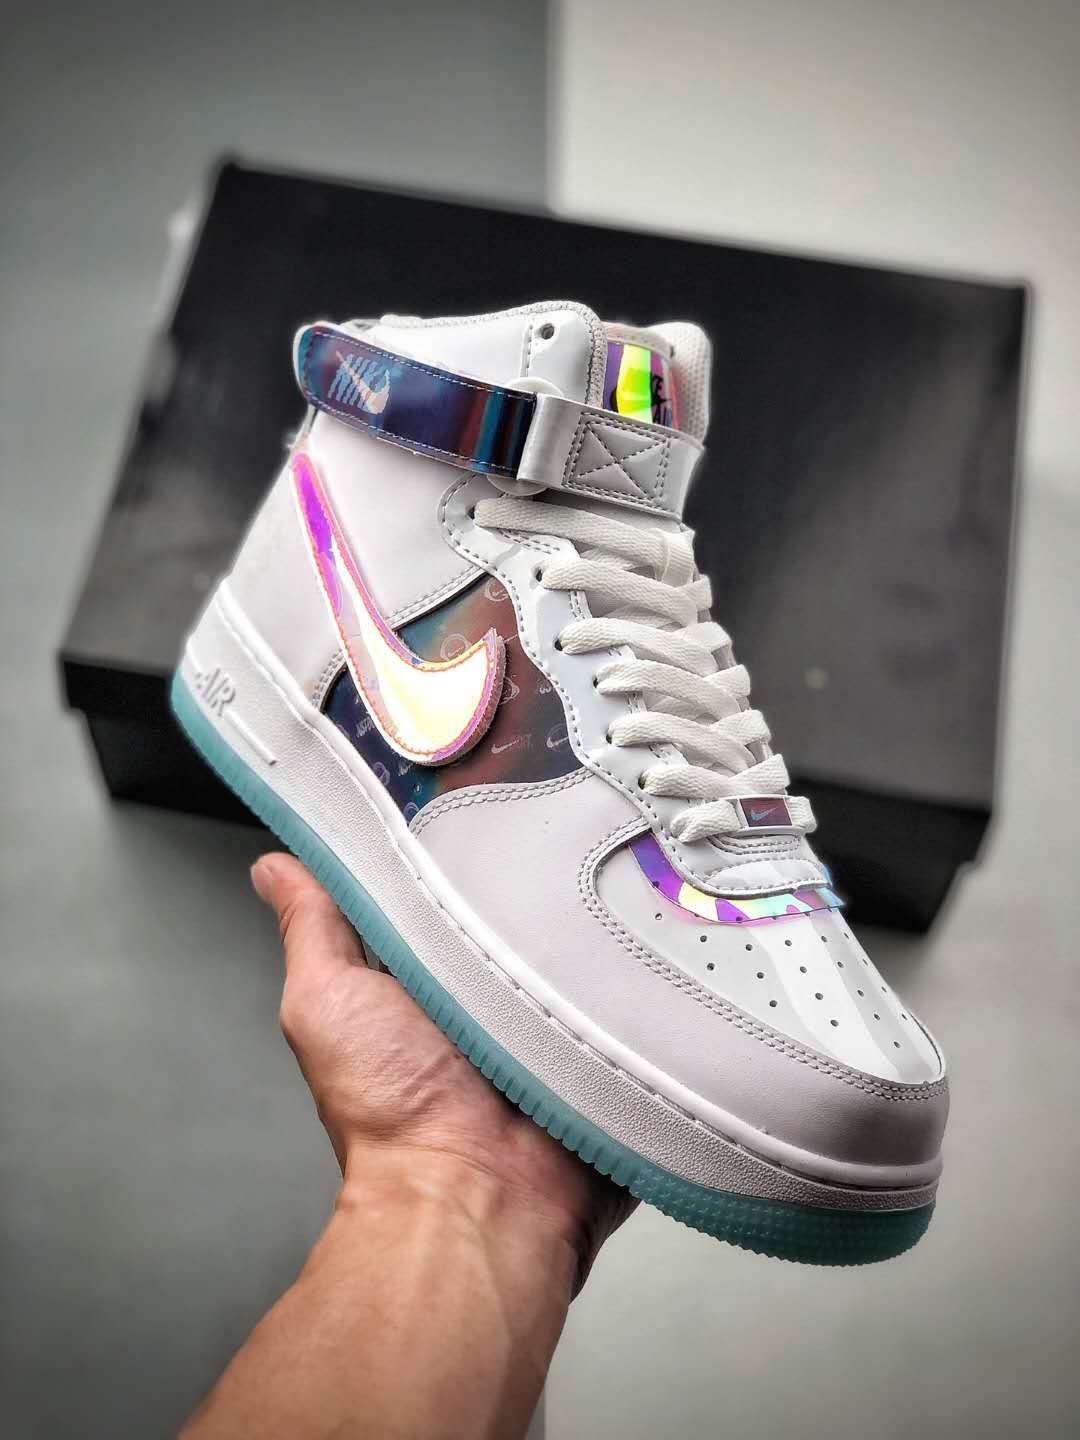 Nike Air Force 1 High LX 'Have A Good Game' DC2111-191 - Premium Sneaker Edition